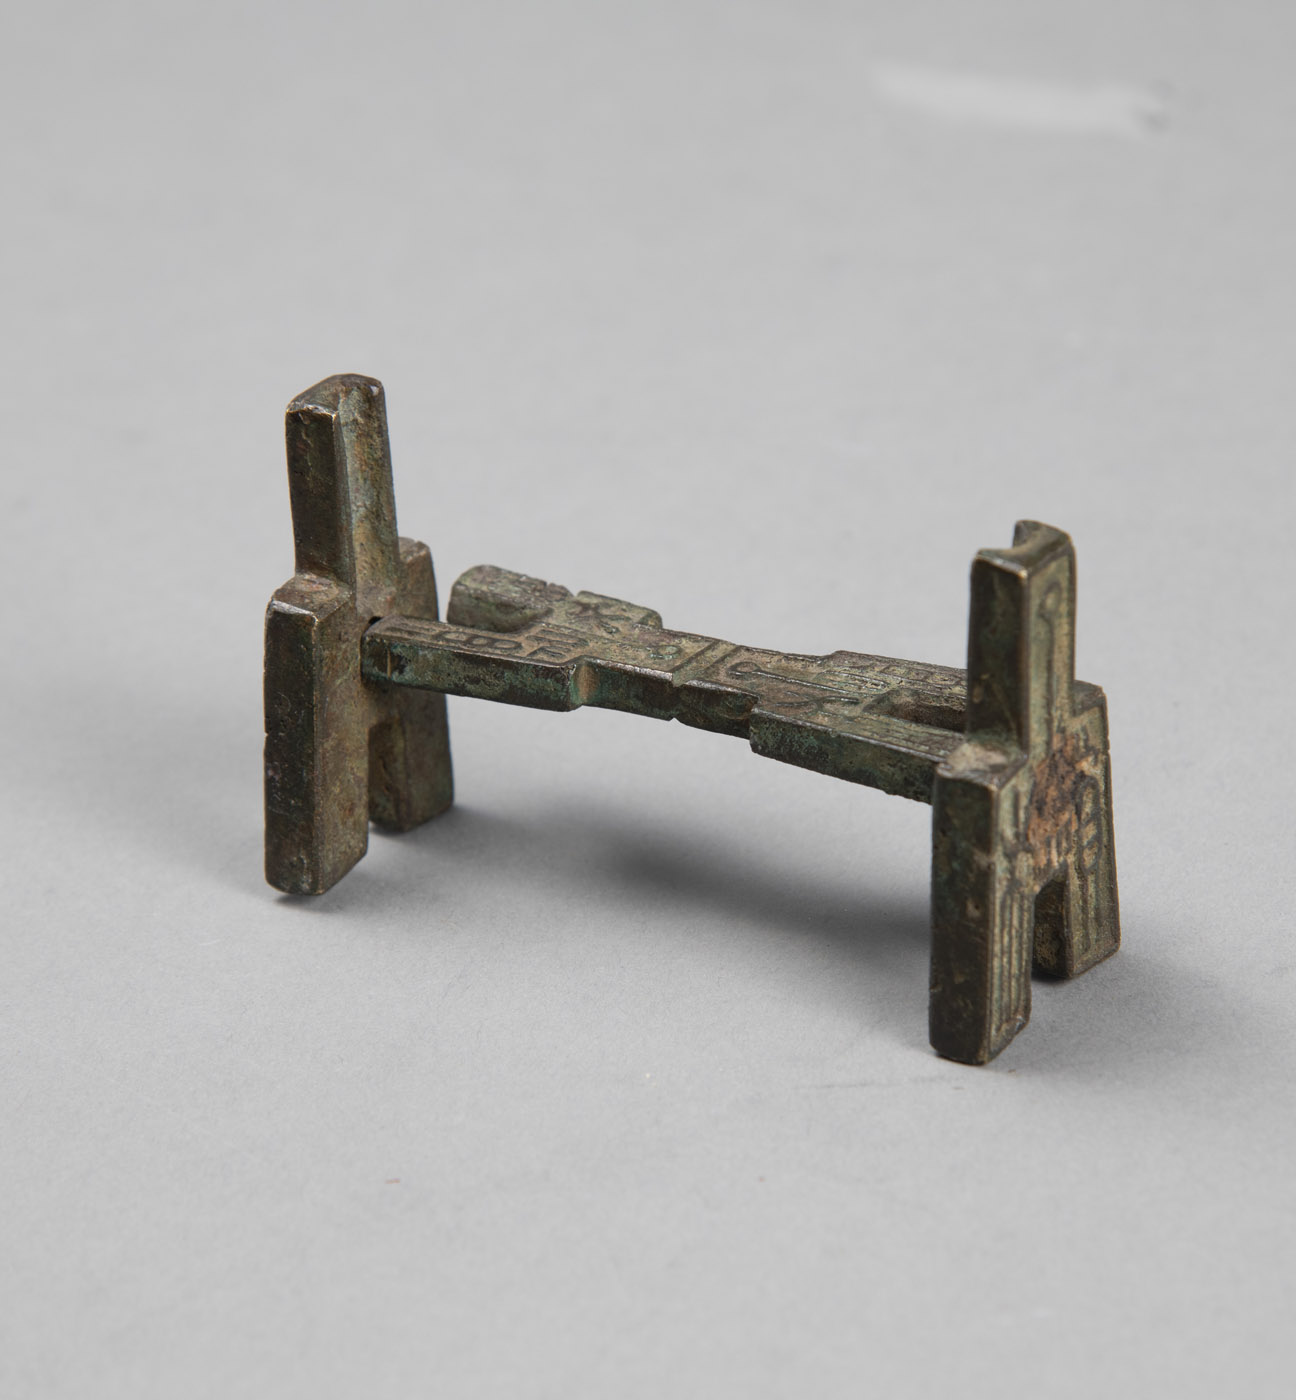 <b>A SMALL BRONZE STAND CONSISTING OF ARCHAIC SPADE COINS, PROBABLY FOR A TABLE SCREEN</b>